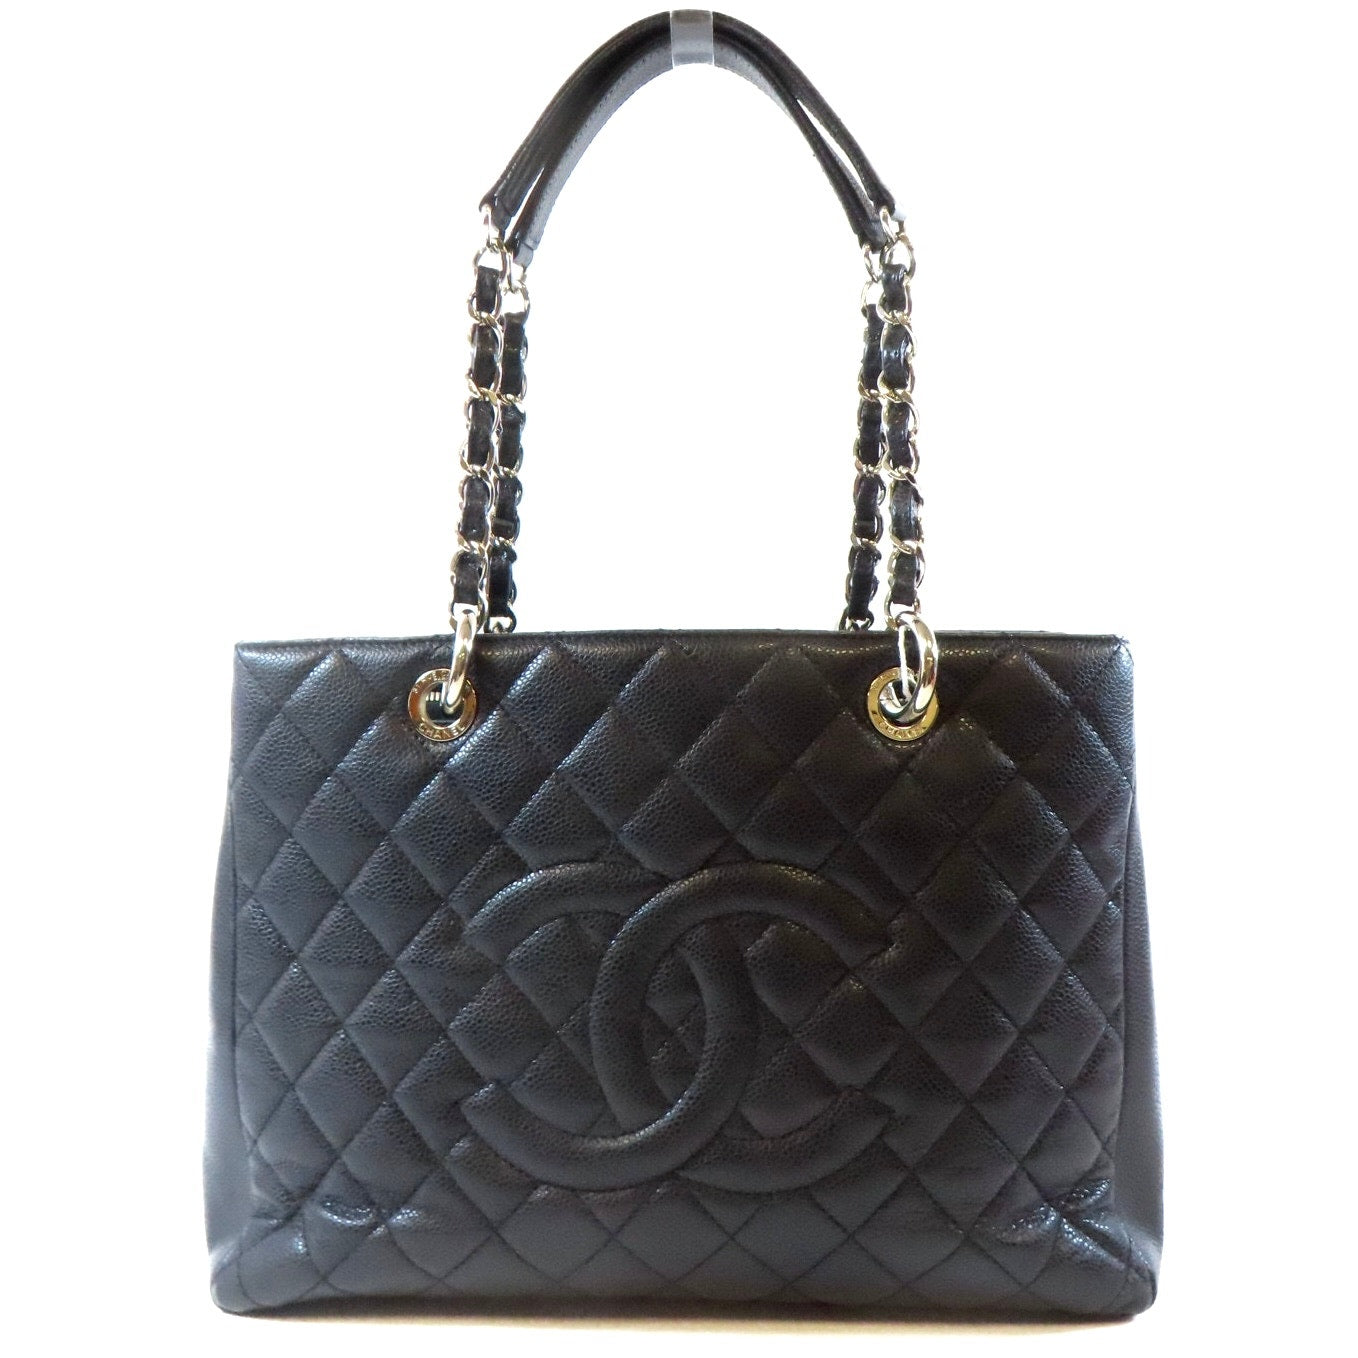 Authentic CHANEL Quilted Chain Shoulder Handbag